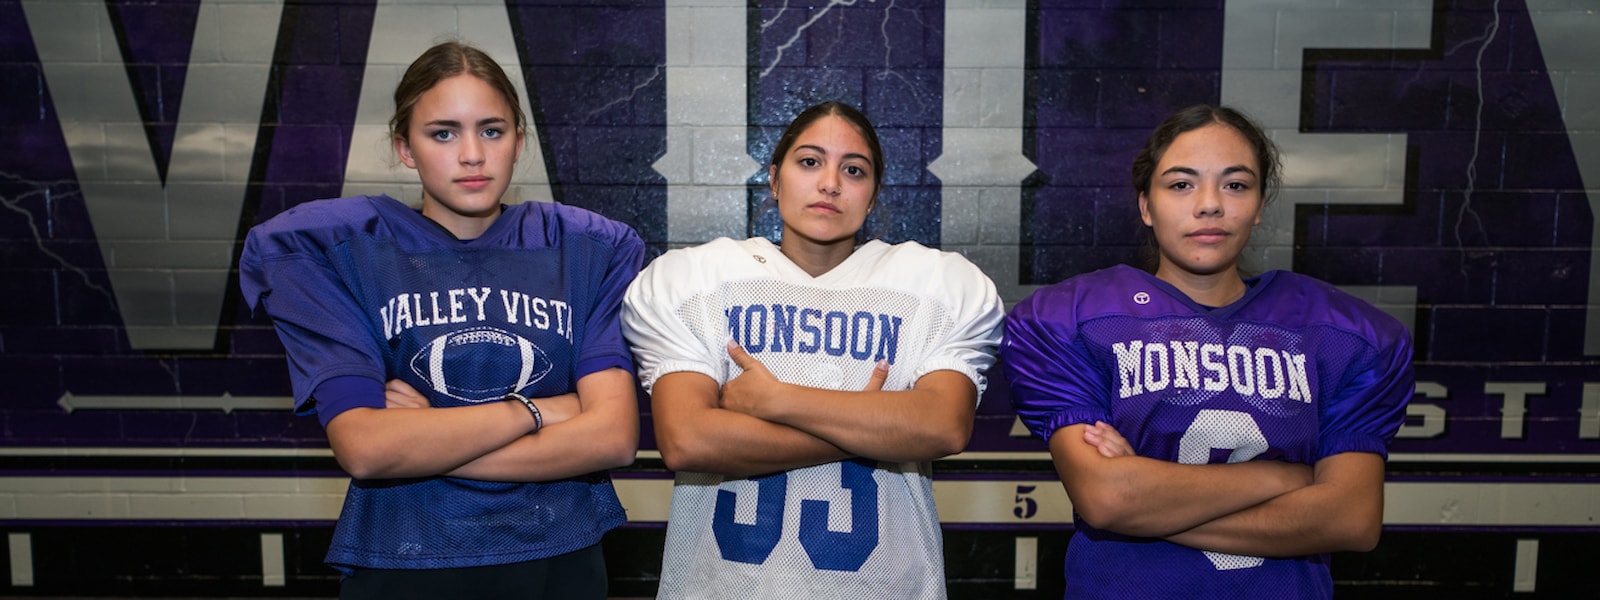 Sara Lowry, Mackenzie Goodrich, and Vanezza Valdez pose for a photo in their football uniforms for Valley Vista High School.